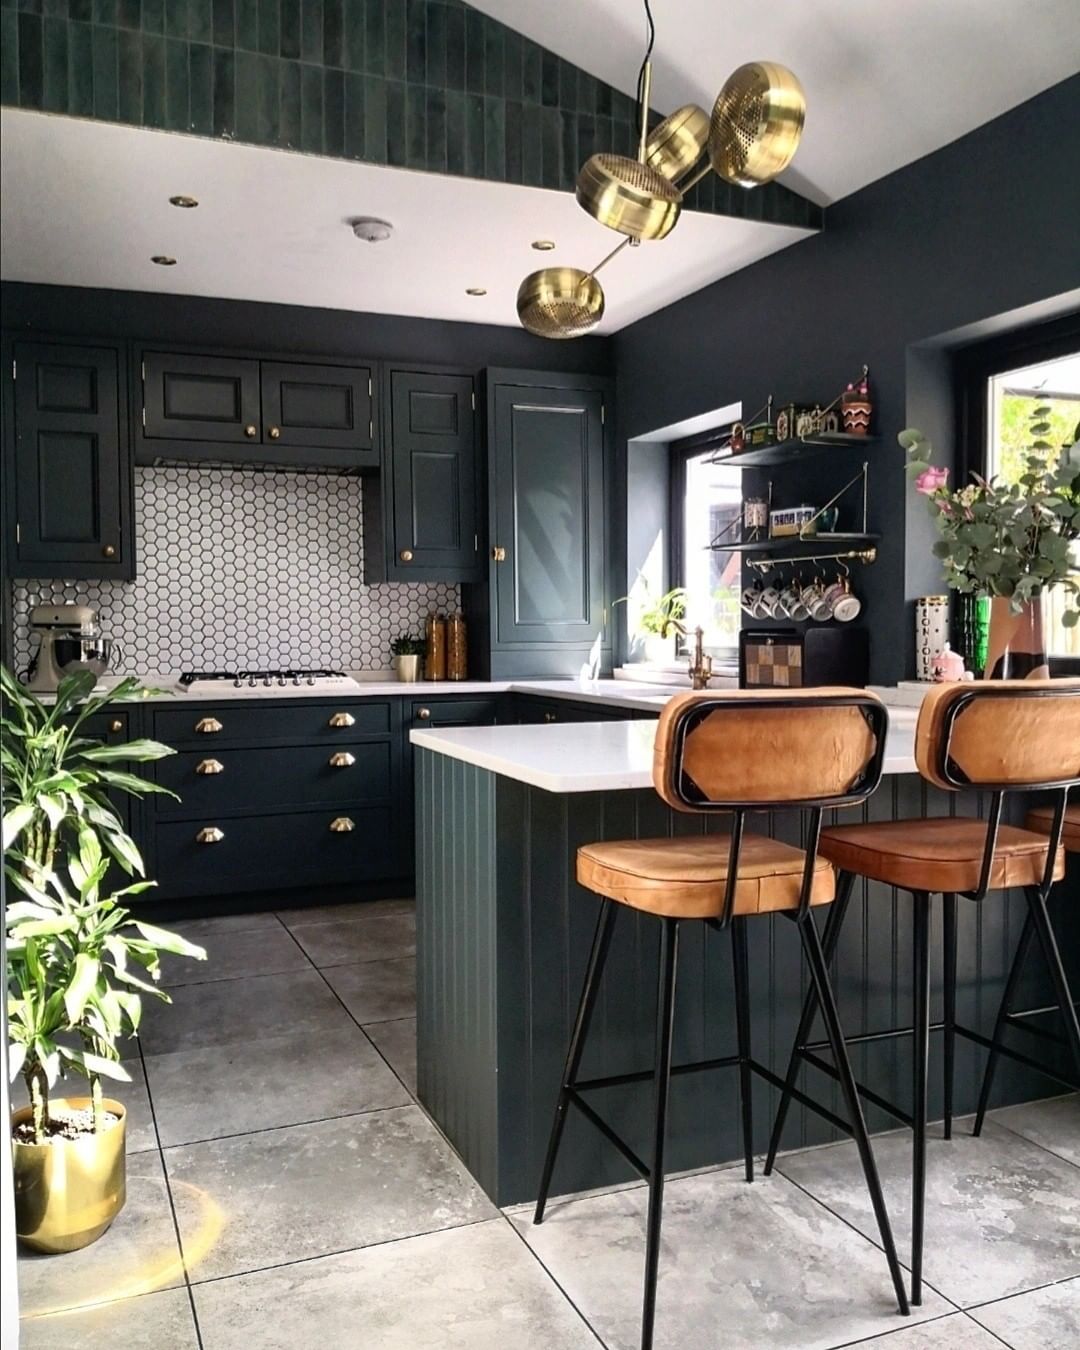 Rich Dark Green Cabinets For A U-Shaped Kitchen With Banquette Seating